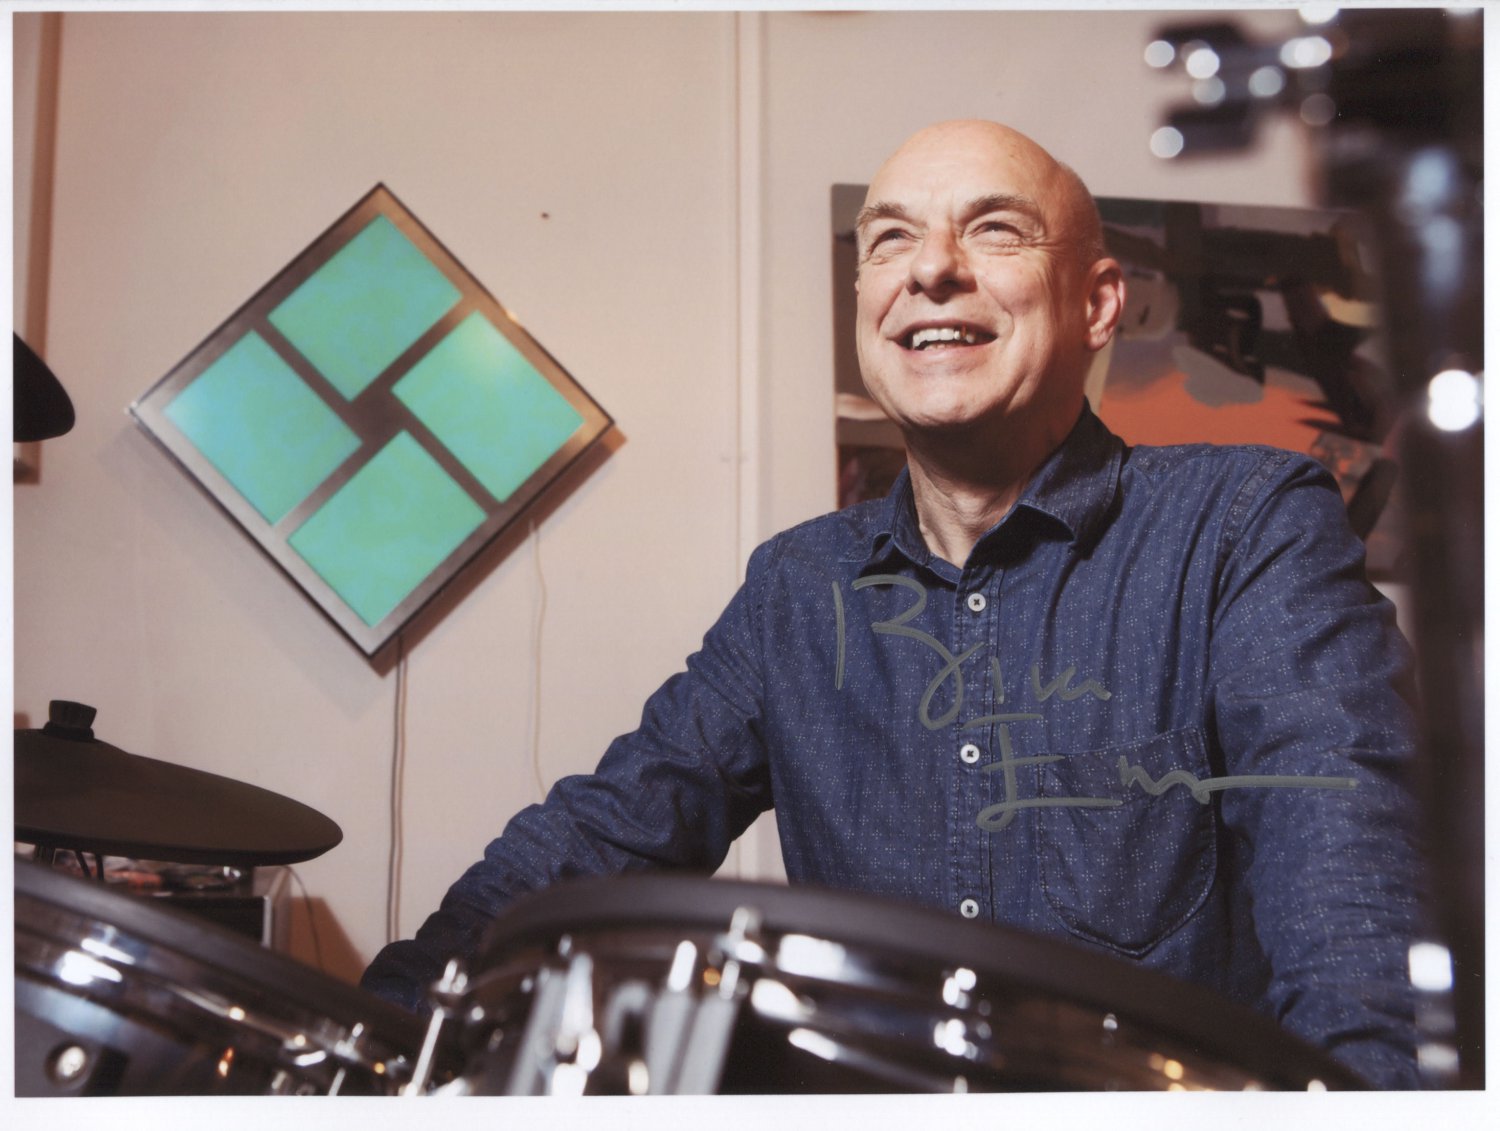 Brian Eno SIGNED 8" x 10" Photo + Certificate Of Authentication  100% Genuine